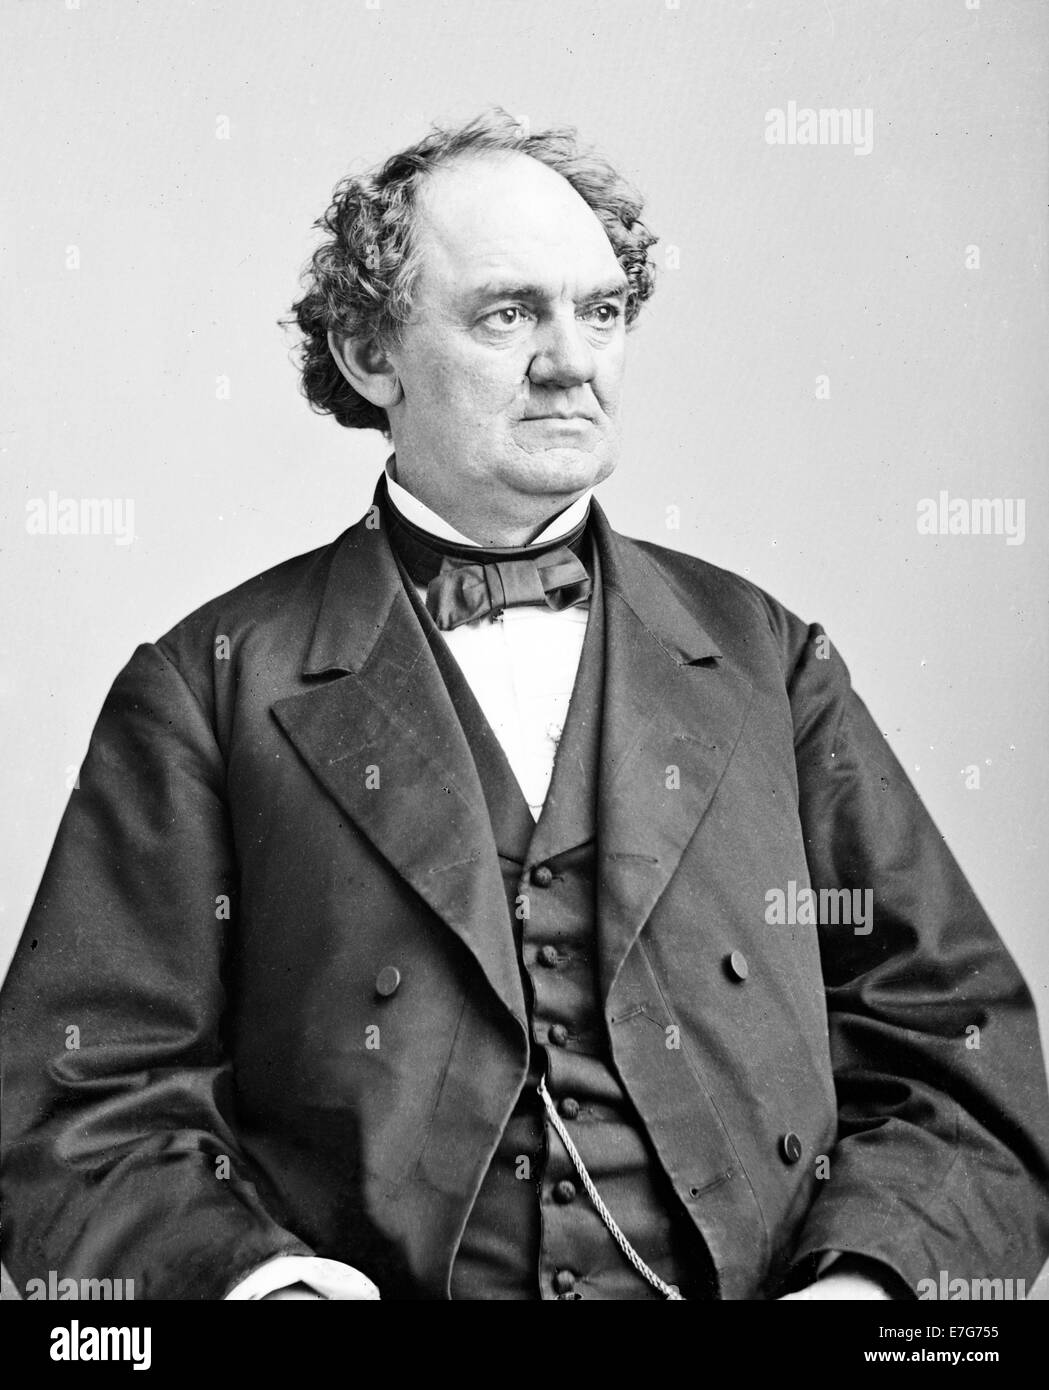 PT Barnum, Phineas Taylor Barnum, American showman and businessman remembered for founding the Barnum & Bailey Circus. Stock Photo